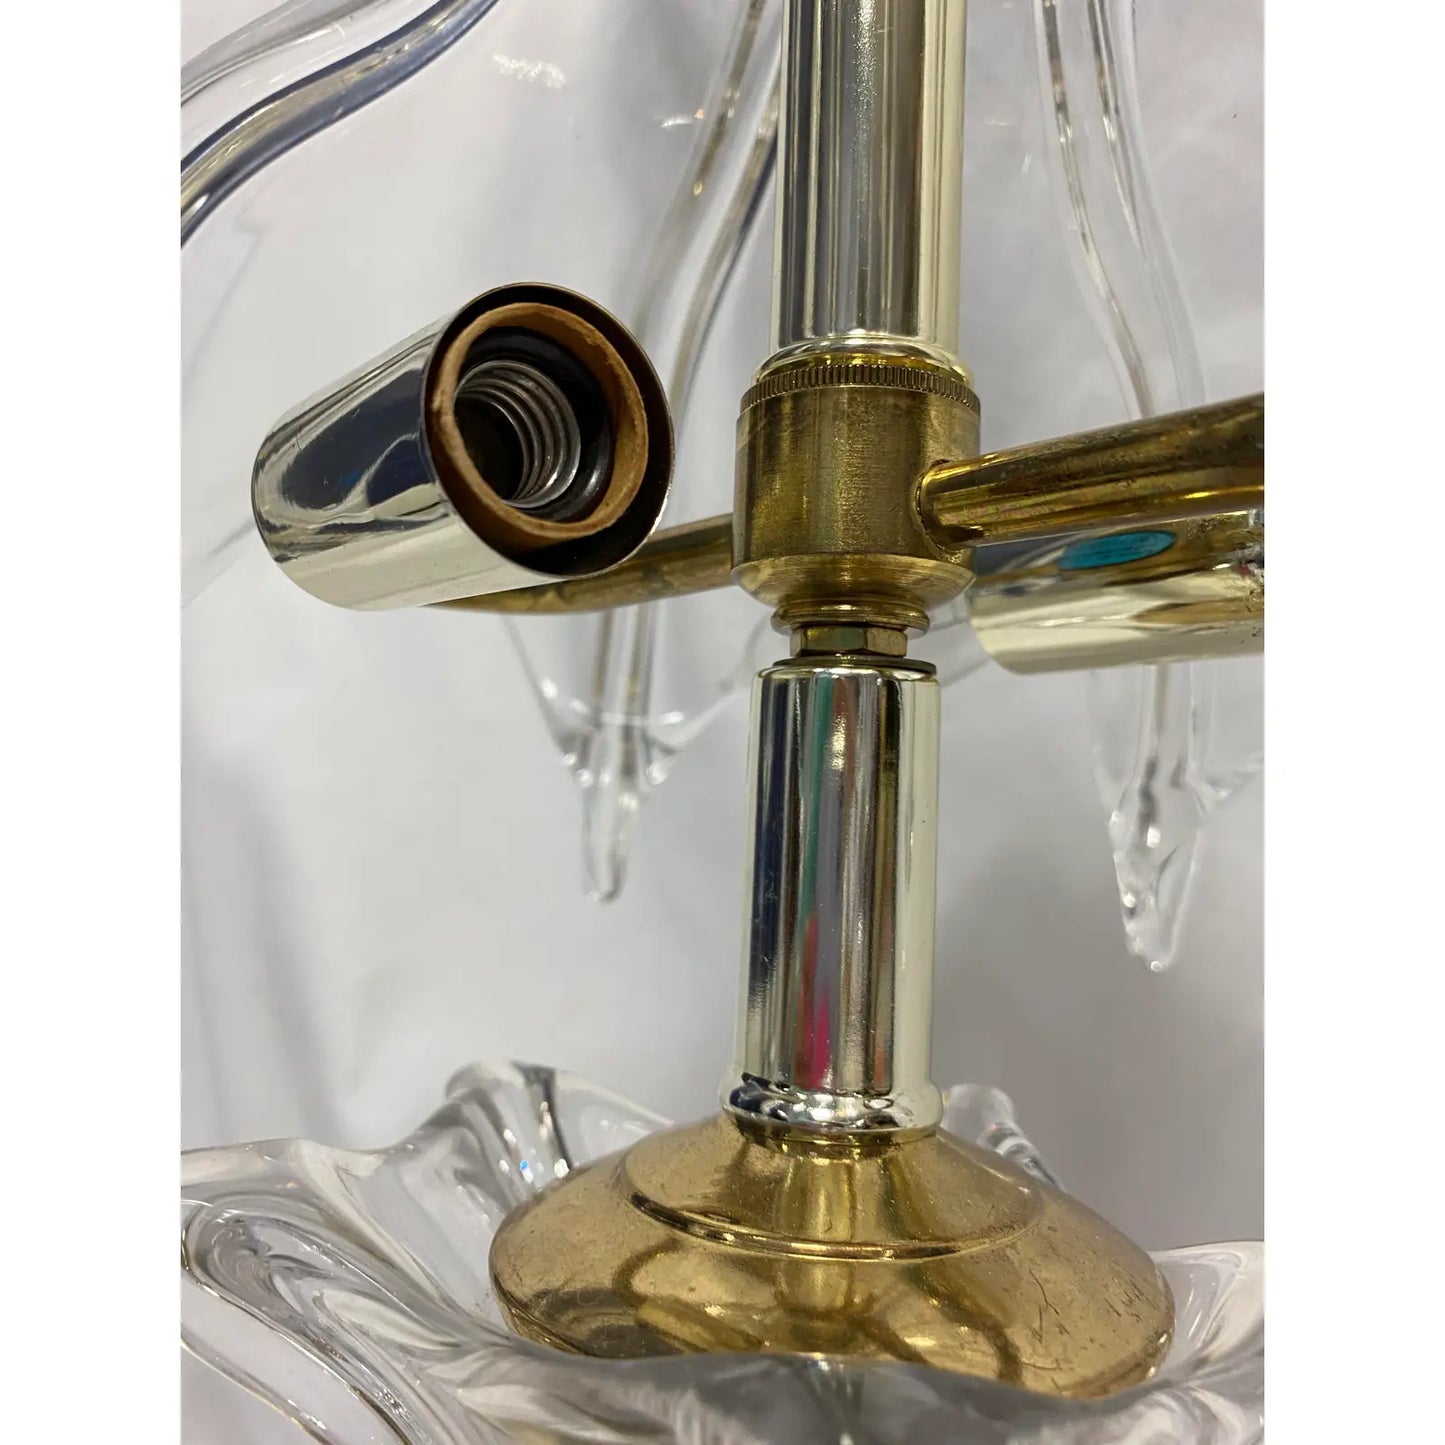 Hand Blown Glass and Brass Table Lamp